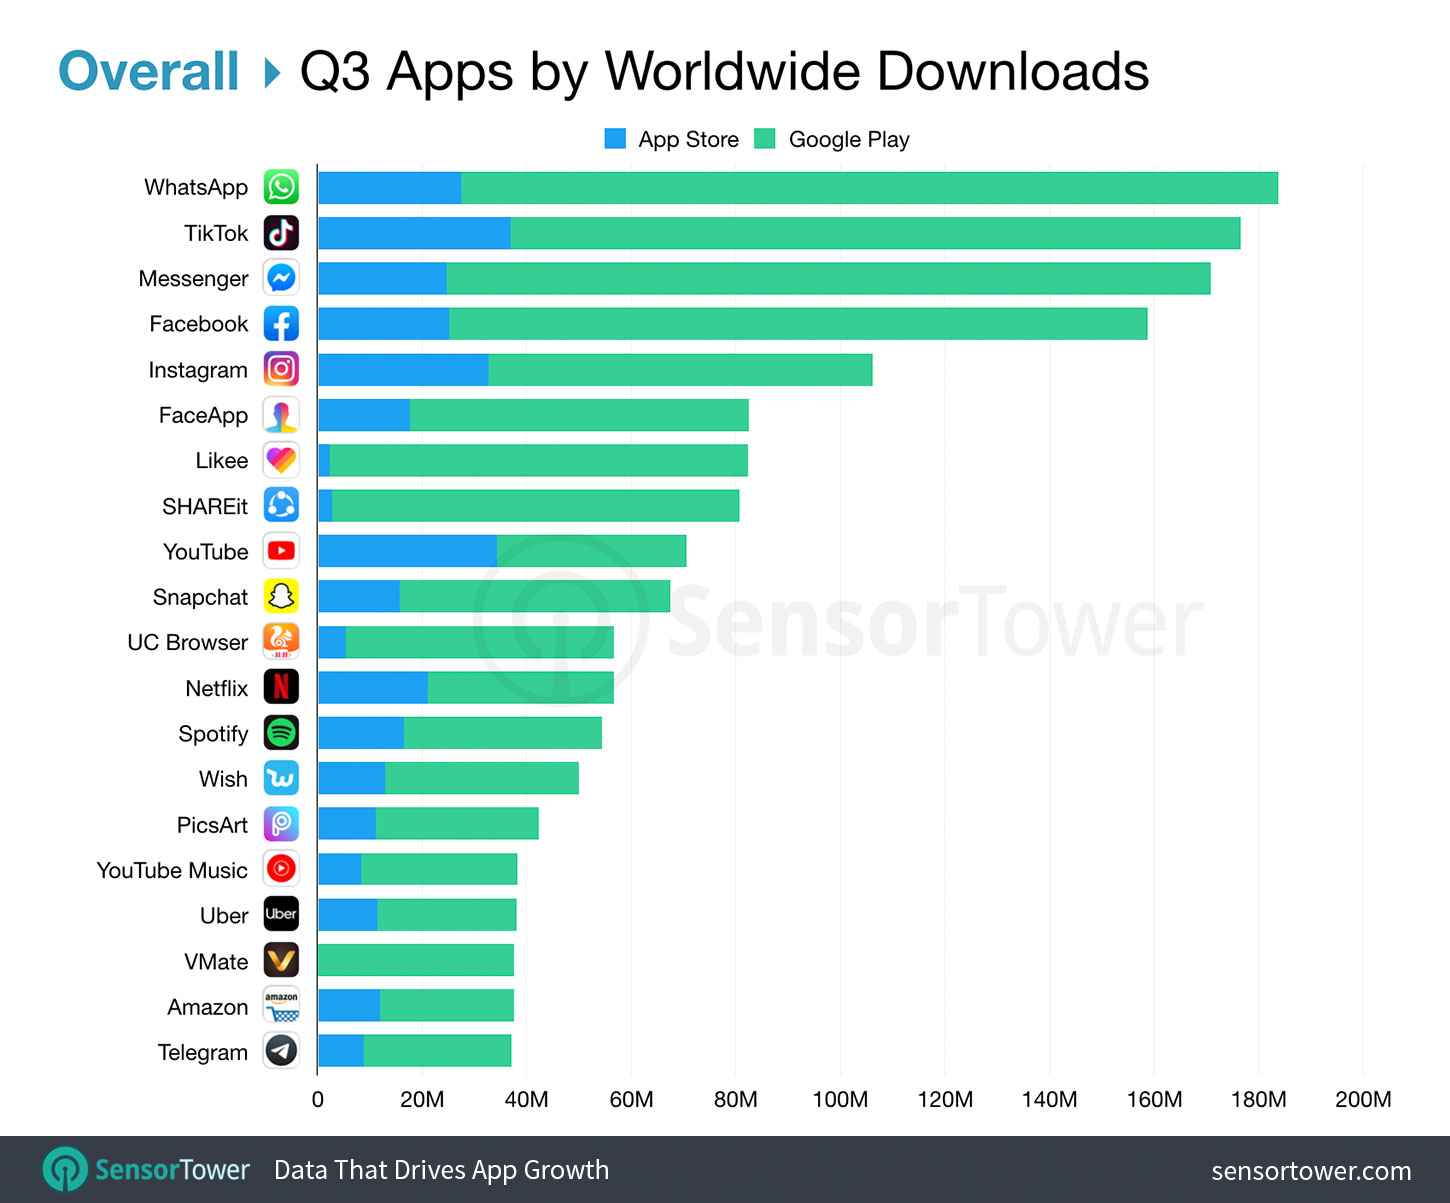 Top Apps Worldwide Overall for Q3 2019